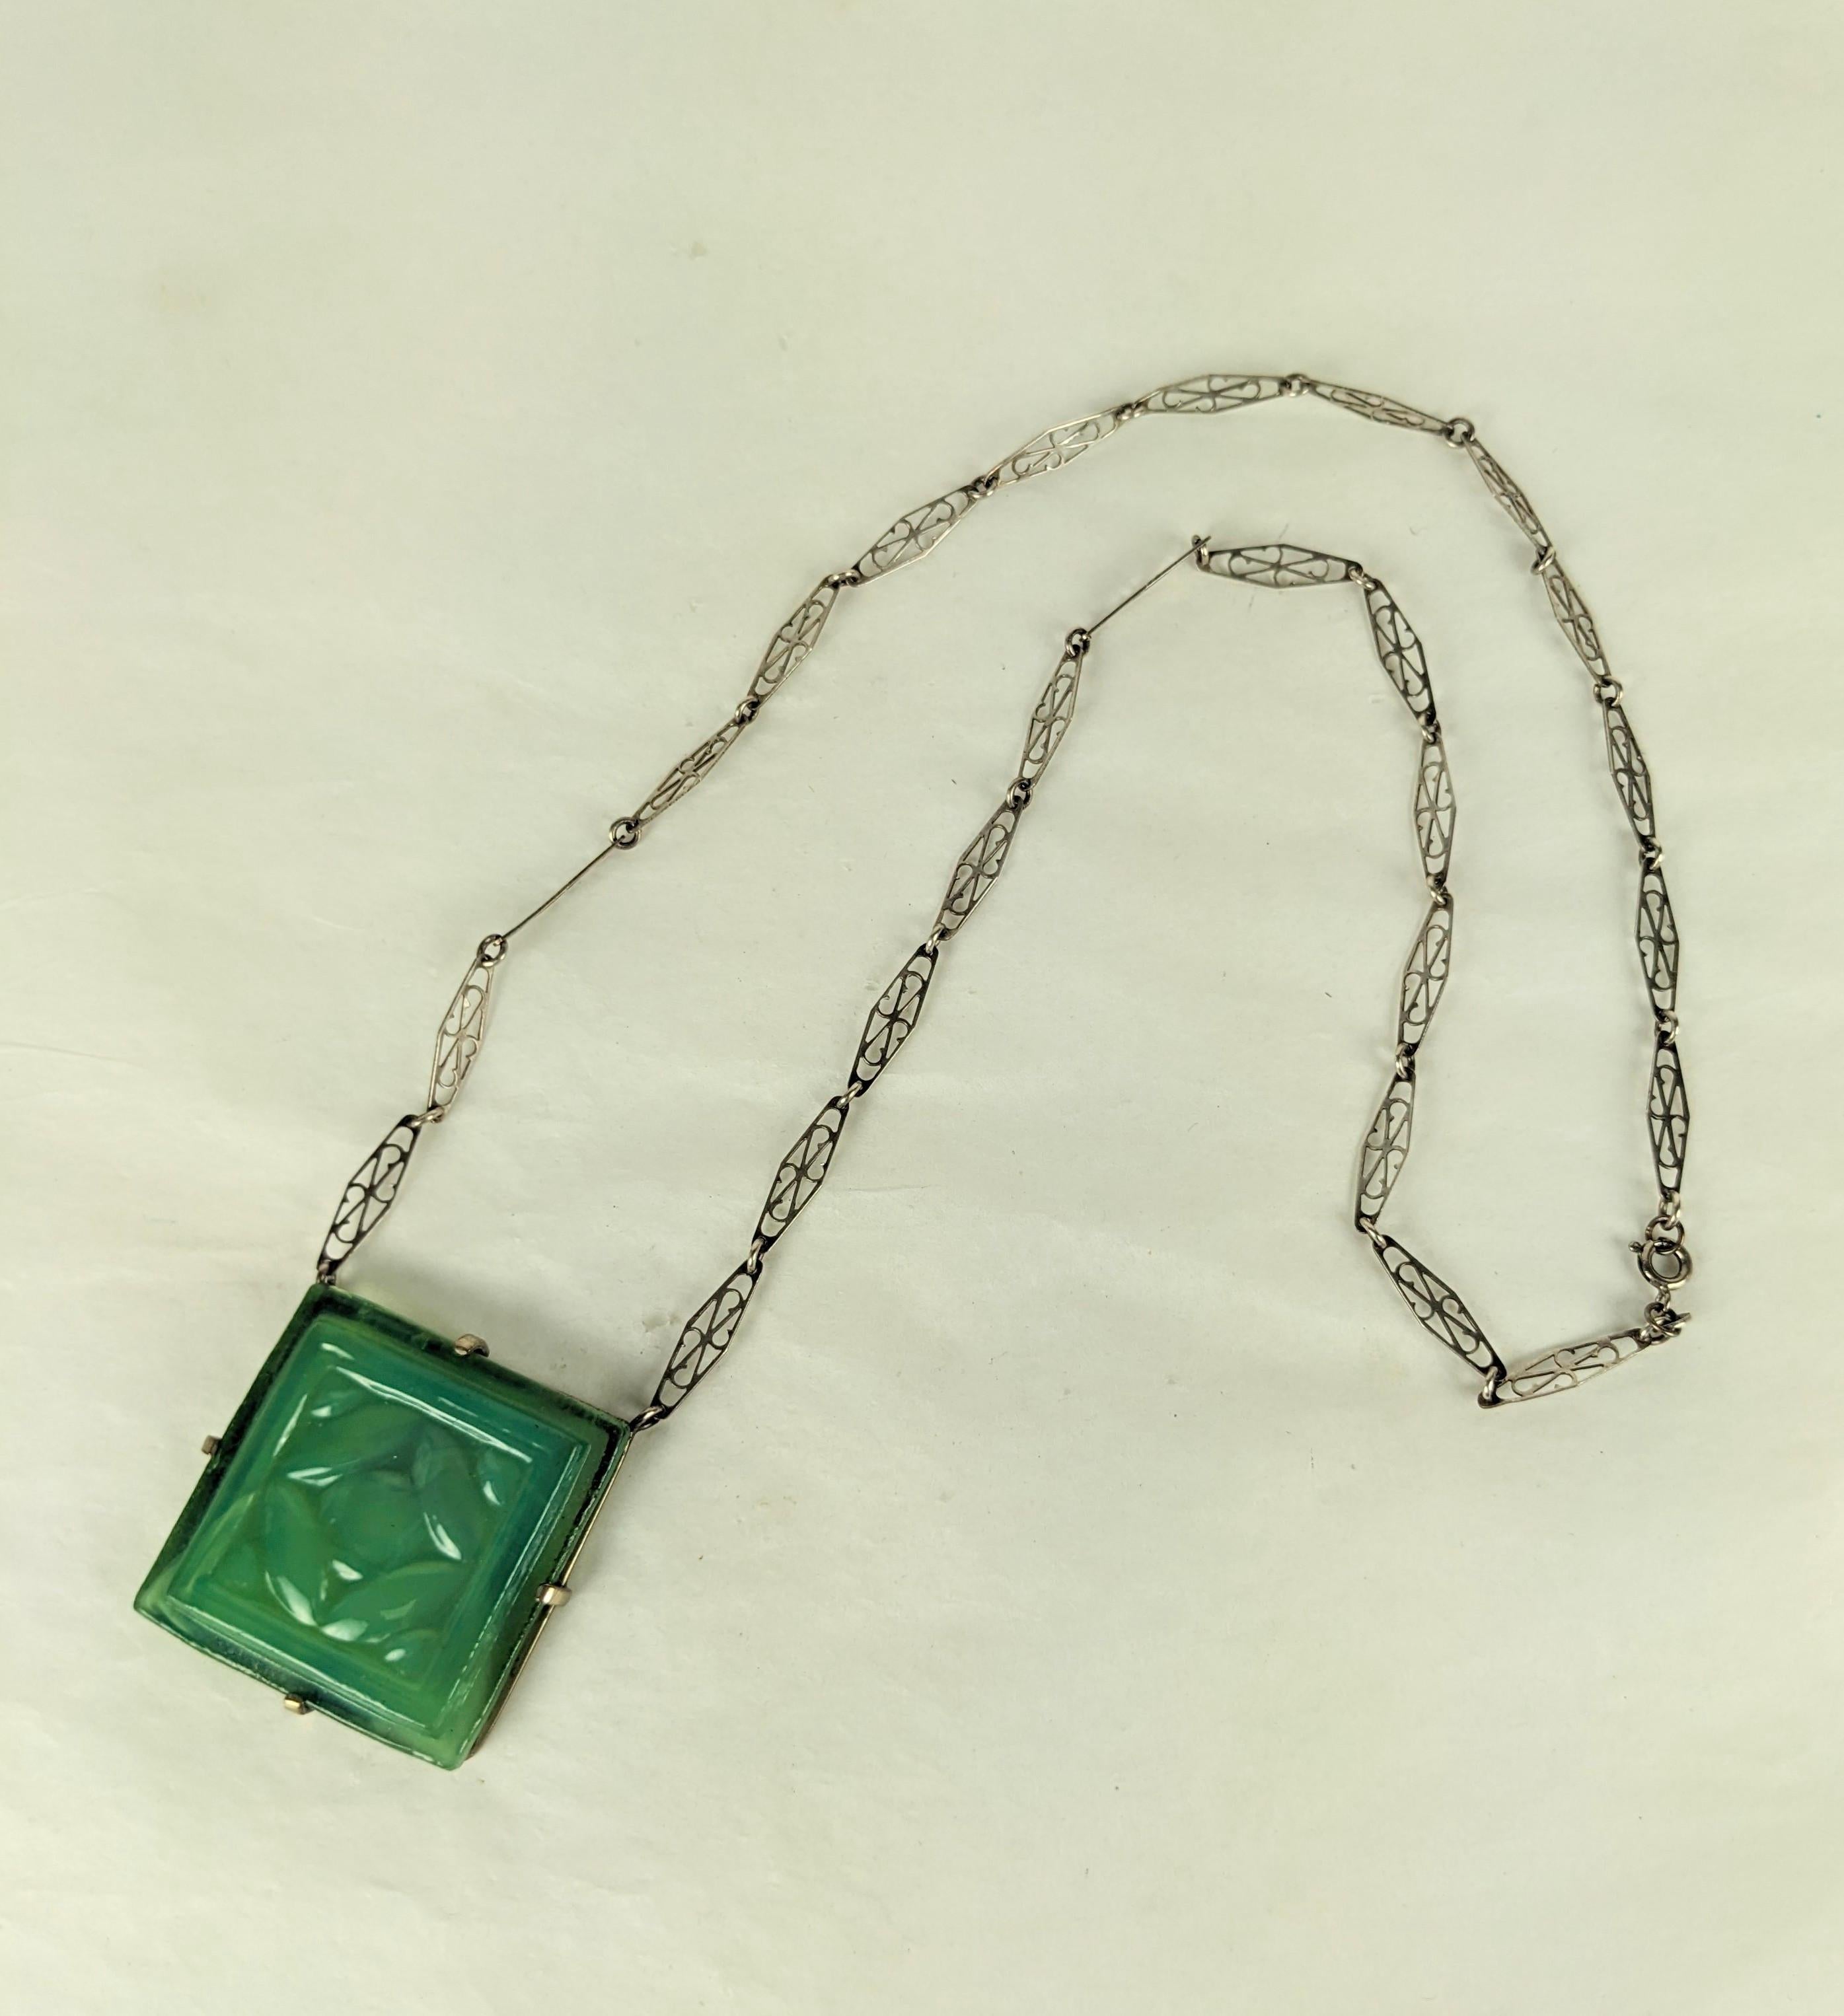 Louis Comfort Tiffany Glass Tile Arts and Crafts Pendant from the turn of the 20th Century. Pale emerald green molded glass tile with slightly opalescent milky center set in a pronged setting.
Fine Hand carved sterling openwork Arts and Crafts